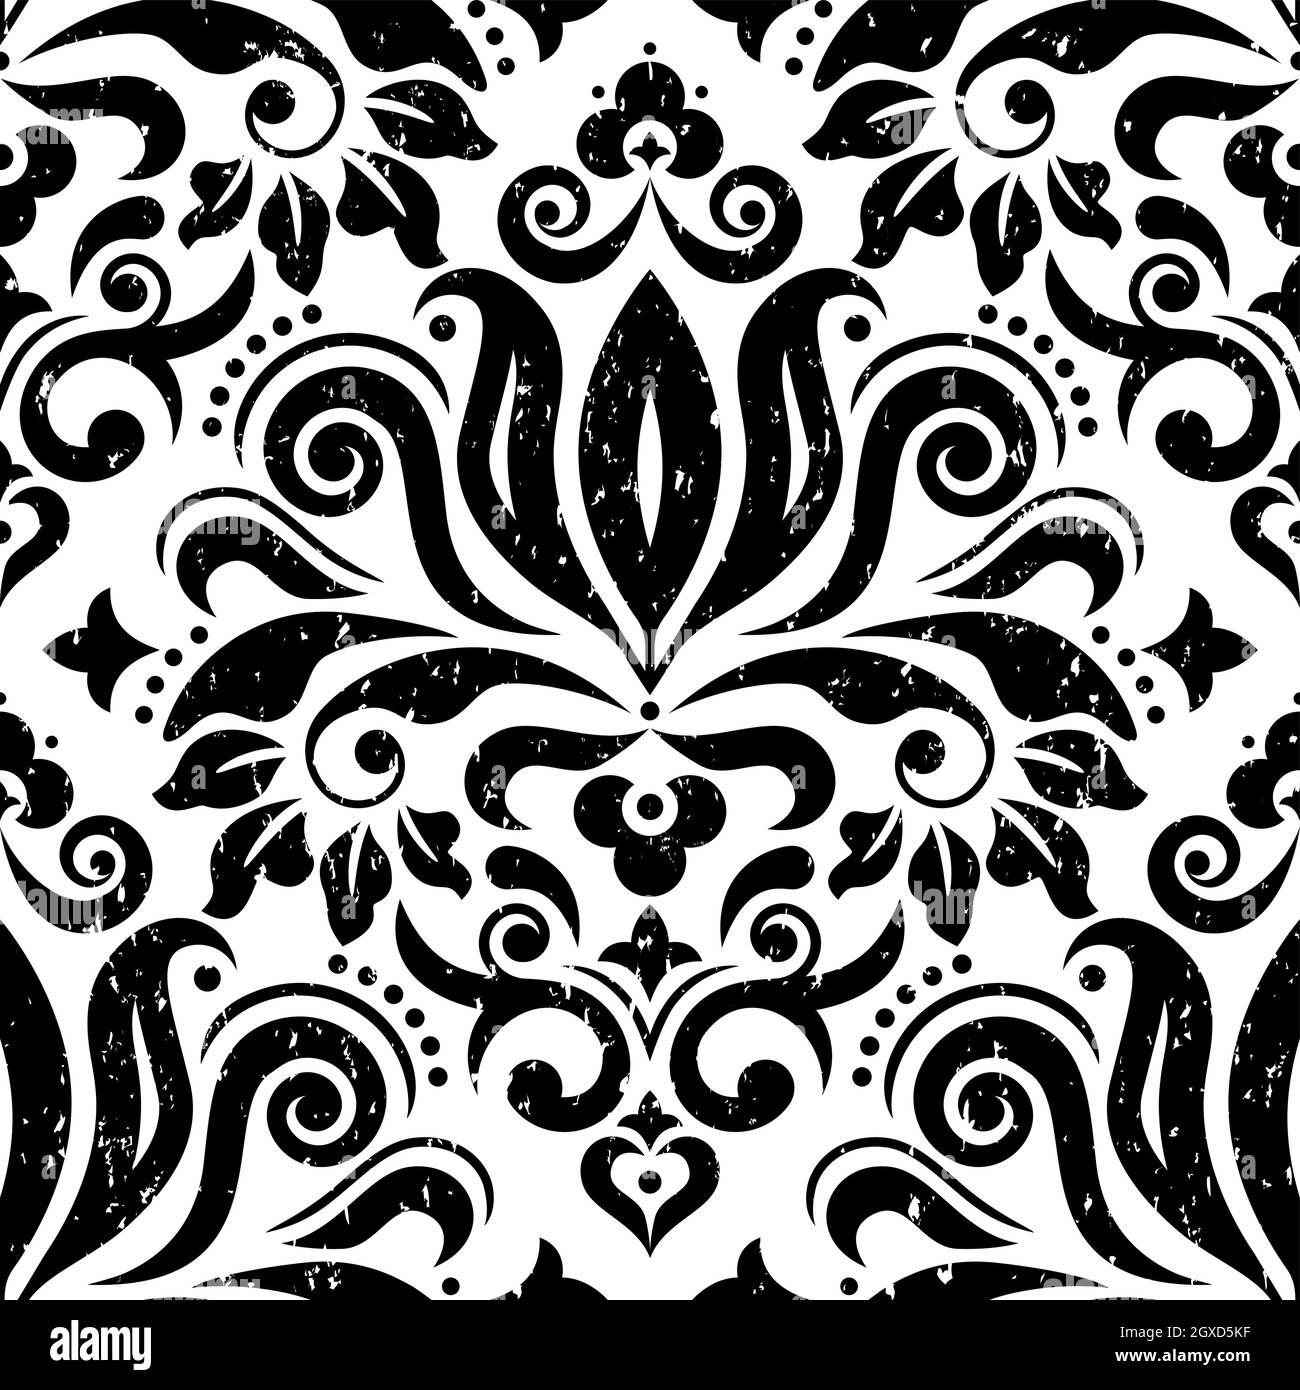 Retro Damask wallpaper or fabric print vector seamless pattern in black, scratched textile vector design with flowers, leaves and swirls Stock Vector